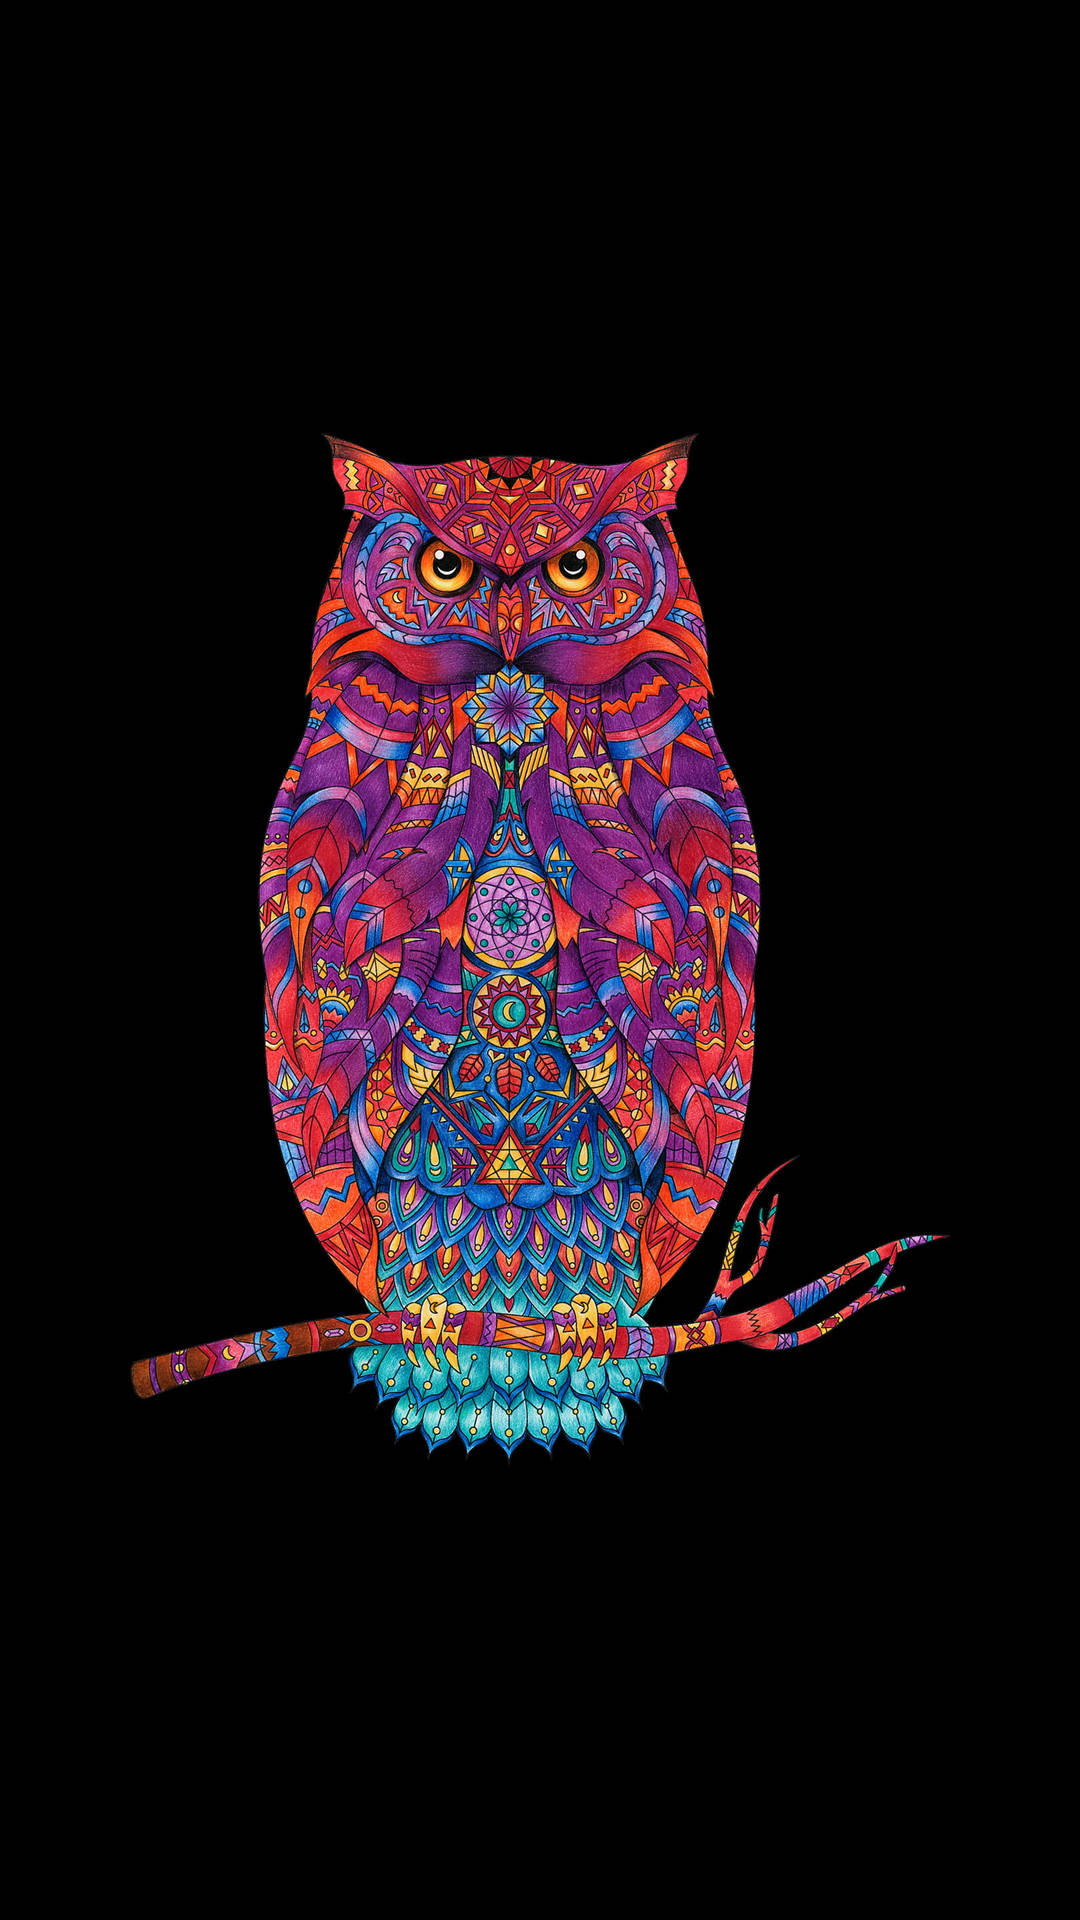 Free Owl Wallpaper Downloads, [100+] Owl Wallpapers for FREE | Wallpapers .com